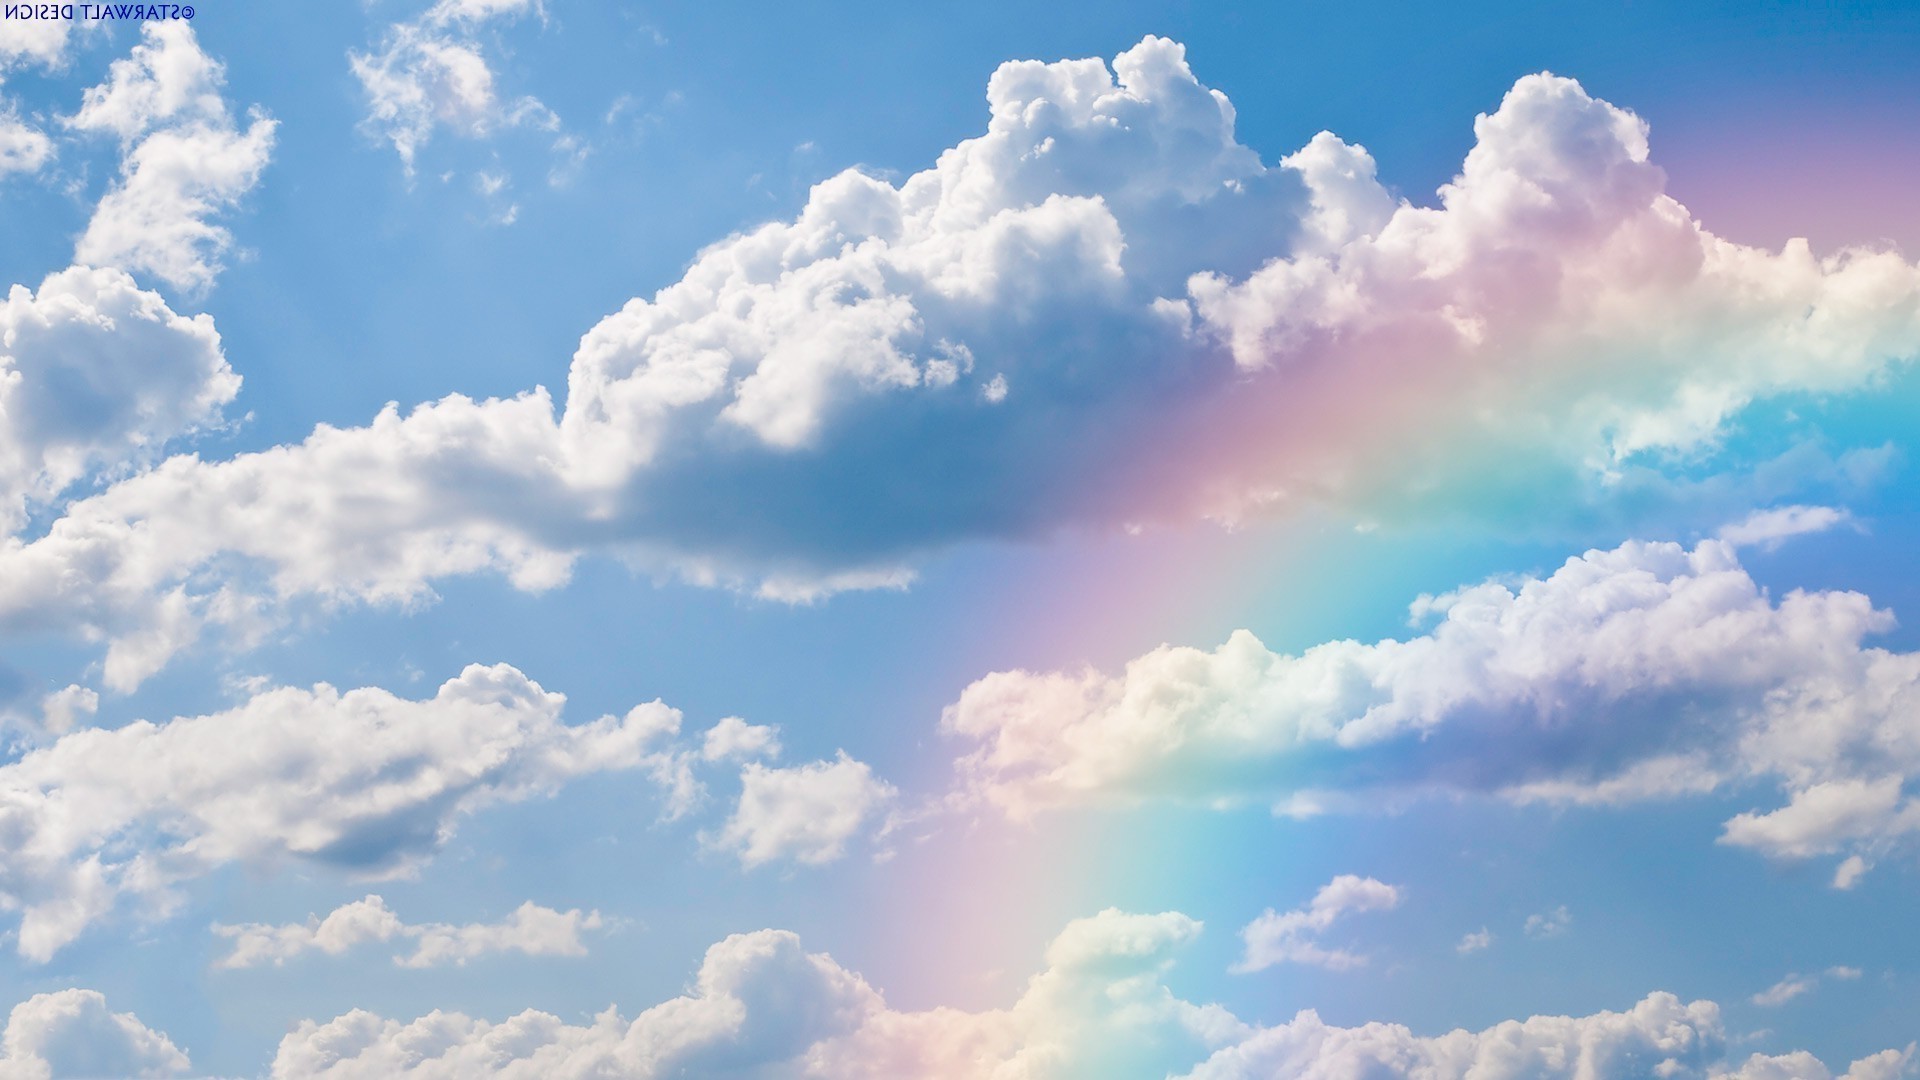 Rainbow in the clouds wallpaper   1034381 1920x1080